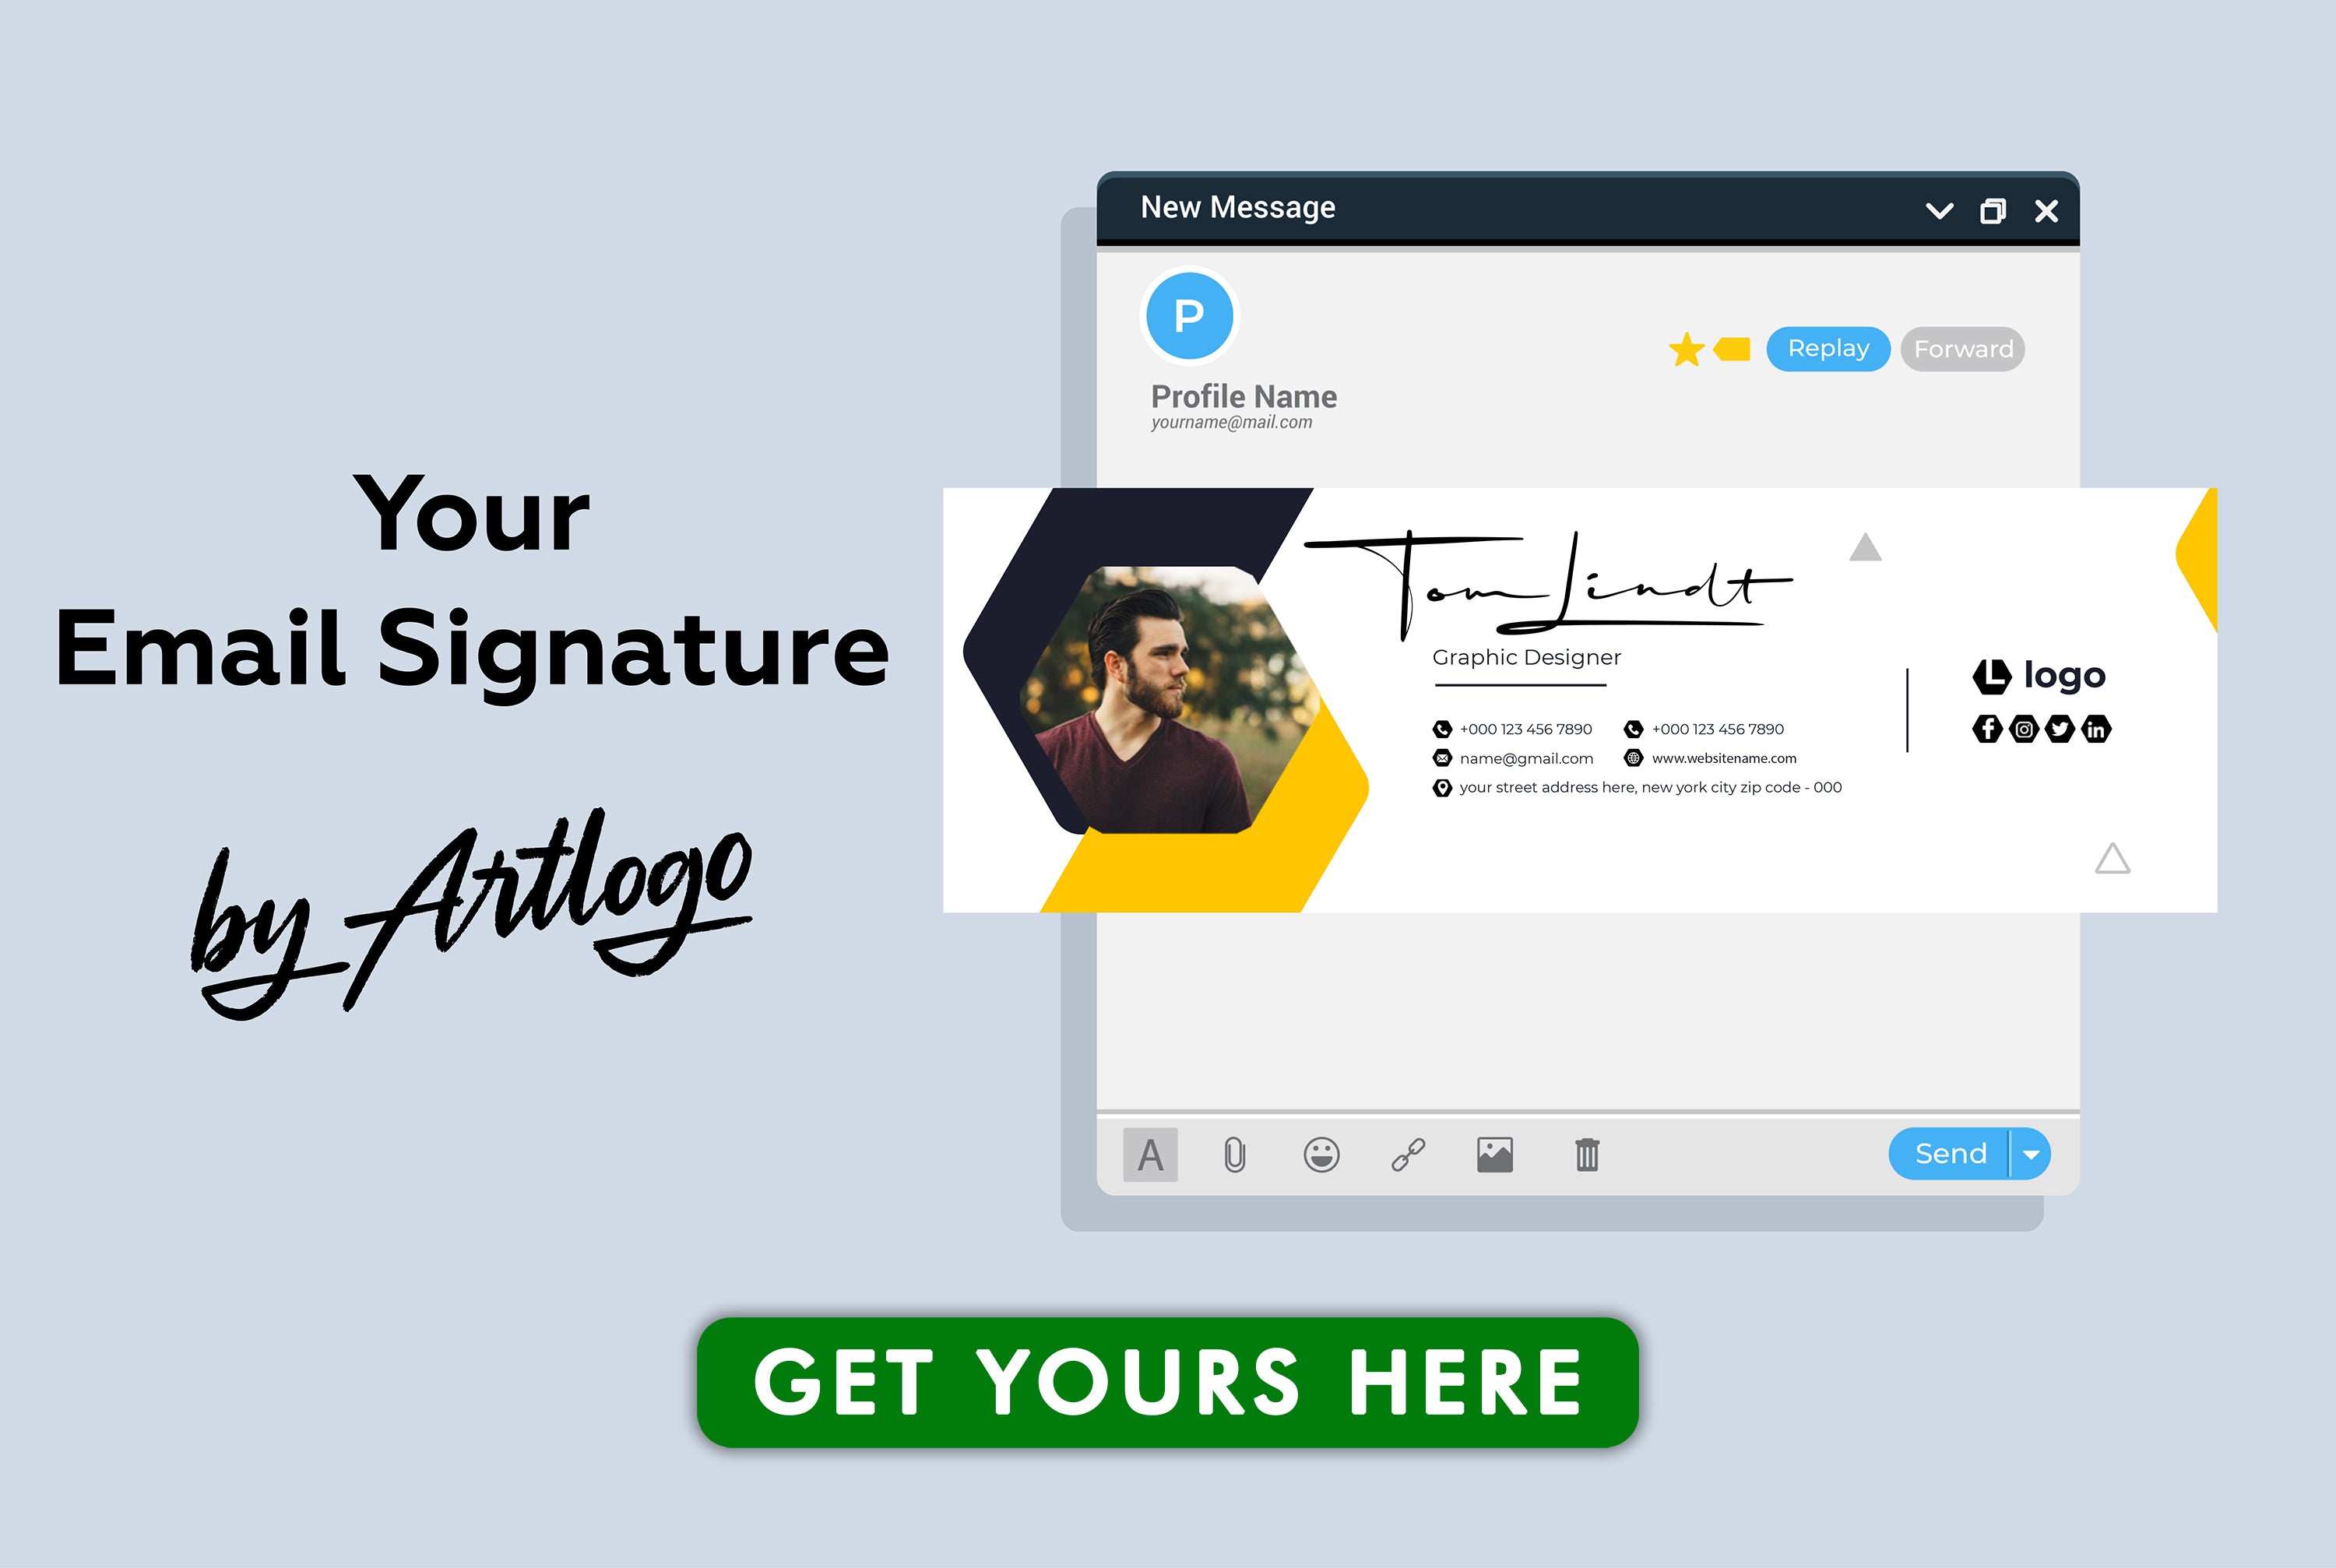 Learn how to add an HTML signature to your Apple Mail with our step-by-step guide. Follow these easy steps to create a professional email signature.